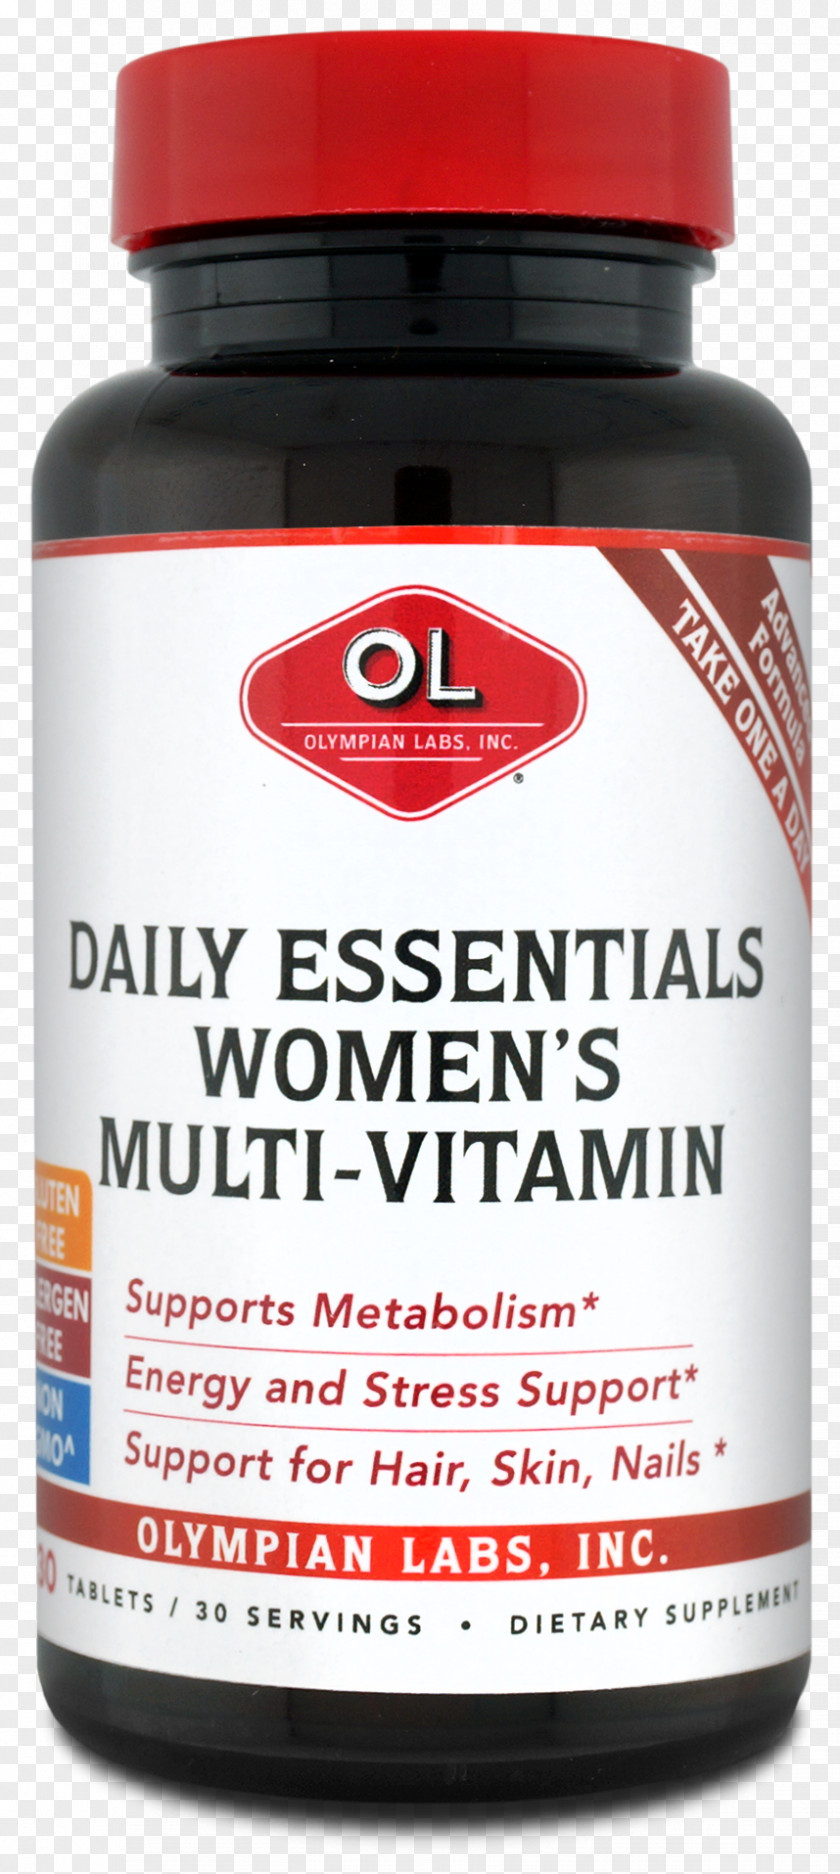 Nail Growth Formula Dietary Supplement Olympian Labs Inc. Daily Essentials Women's Multi-Vitamin Flavor By Bob Holmes, Jonathan Yen (narrator) (9781515966647) Product Labs, PNG